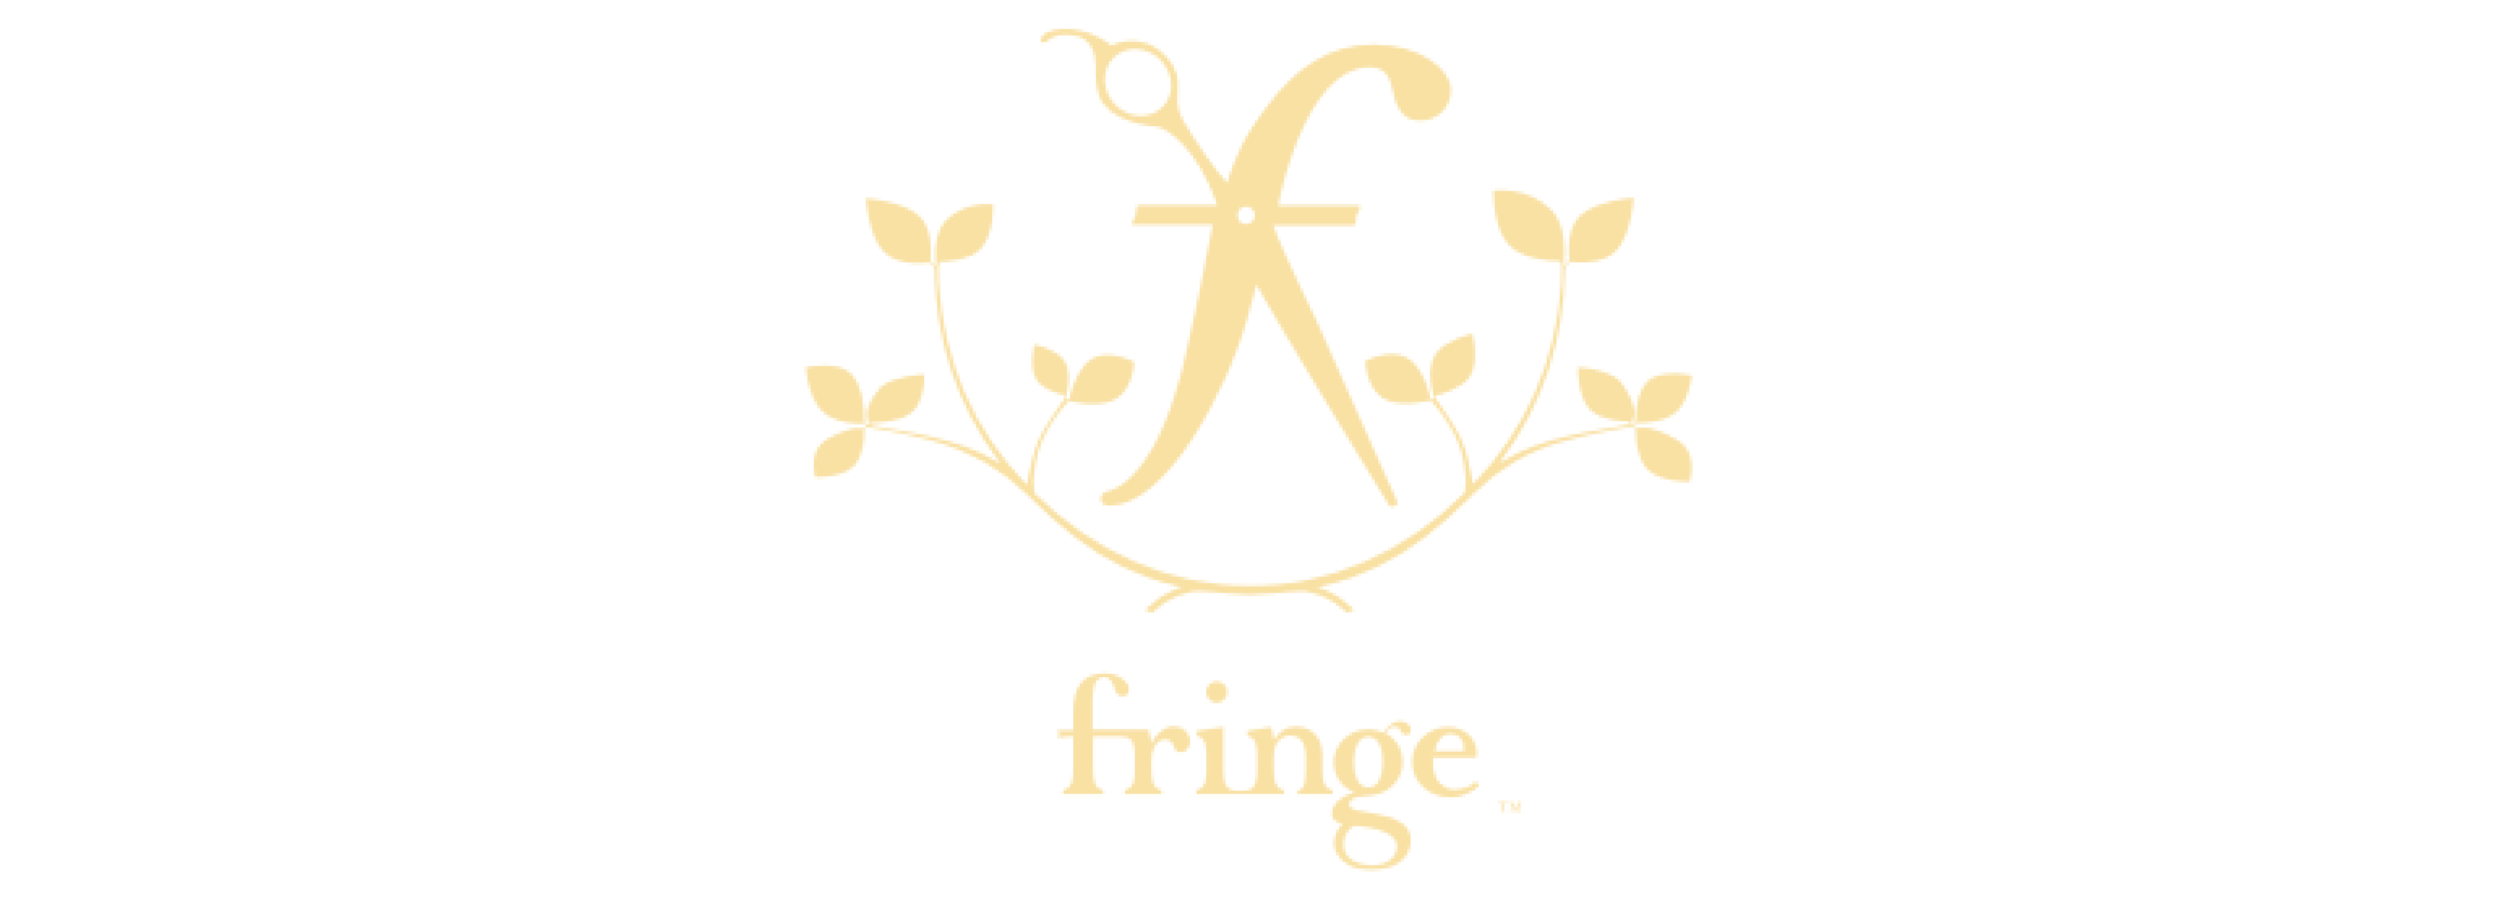 Fringe hair salon logo scissors and vines yellow logo for a woman-owned NYC small business